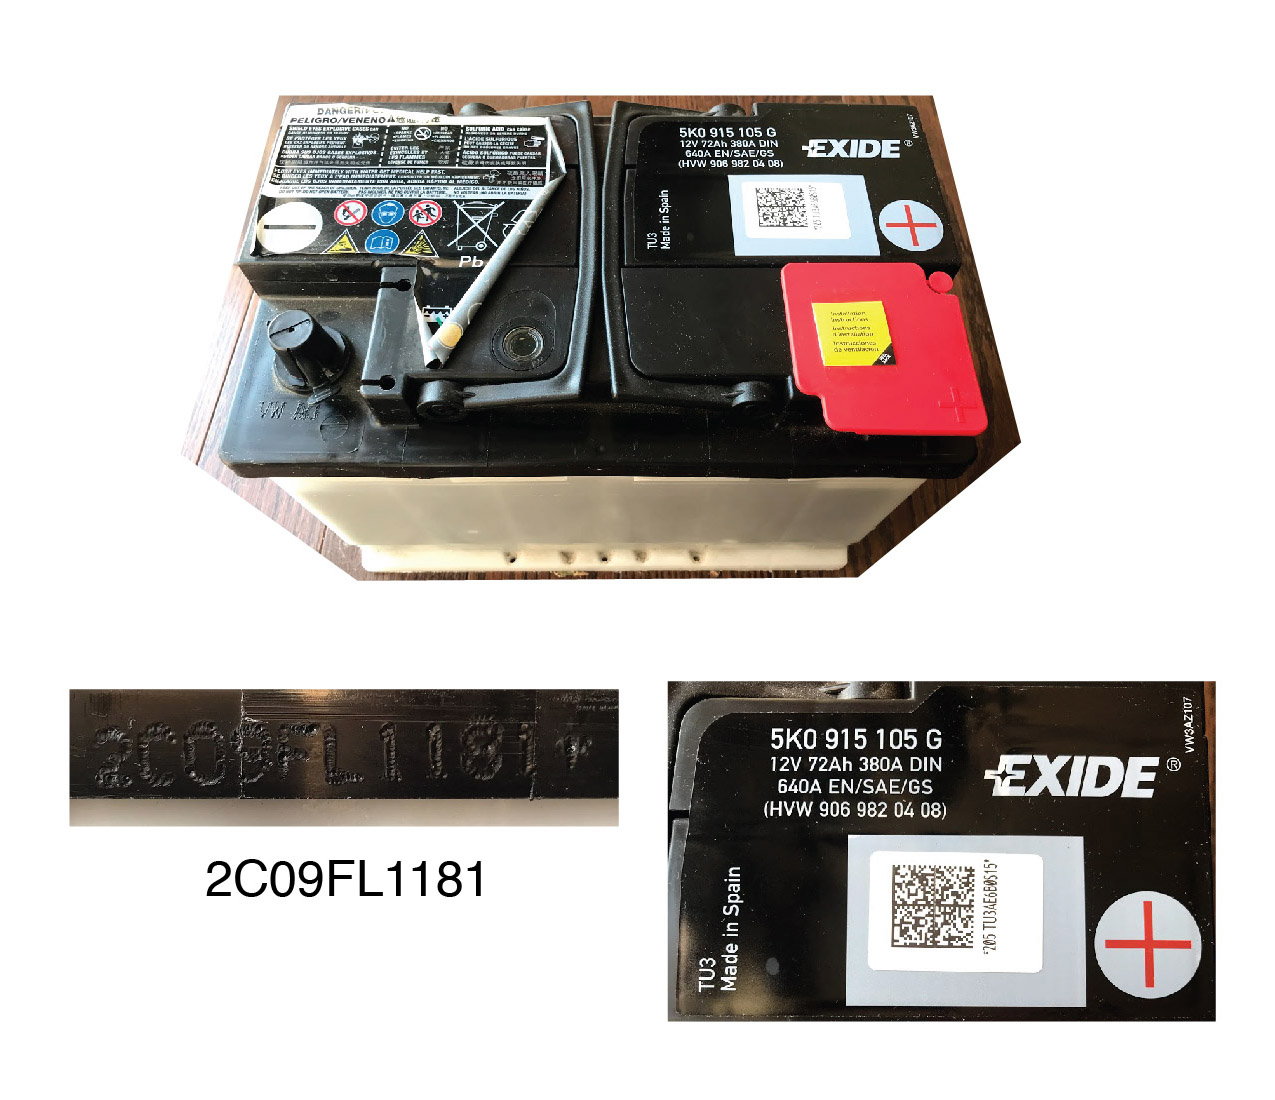 How To Check Exide Battery Manufacturing Date - How To Read Exide